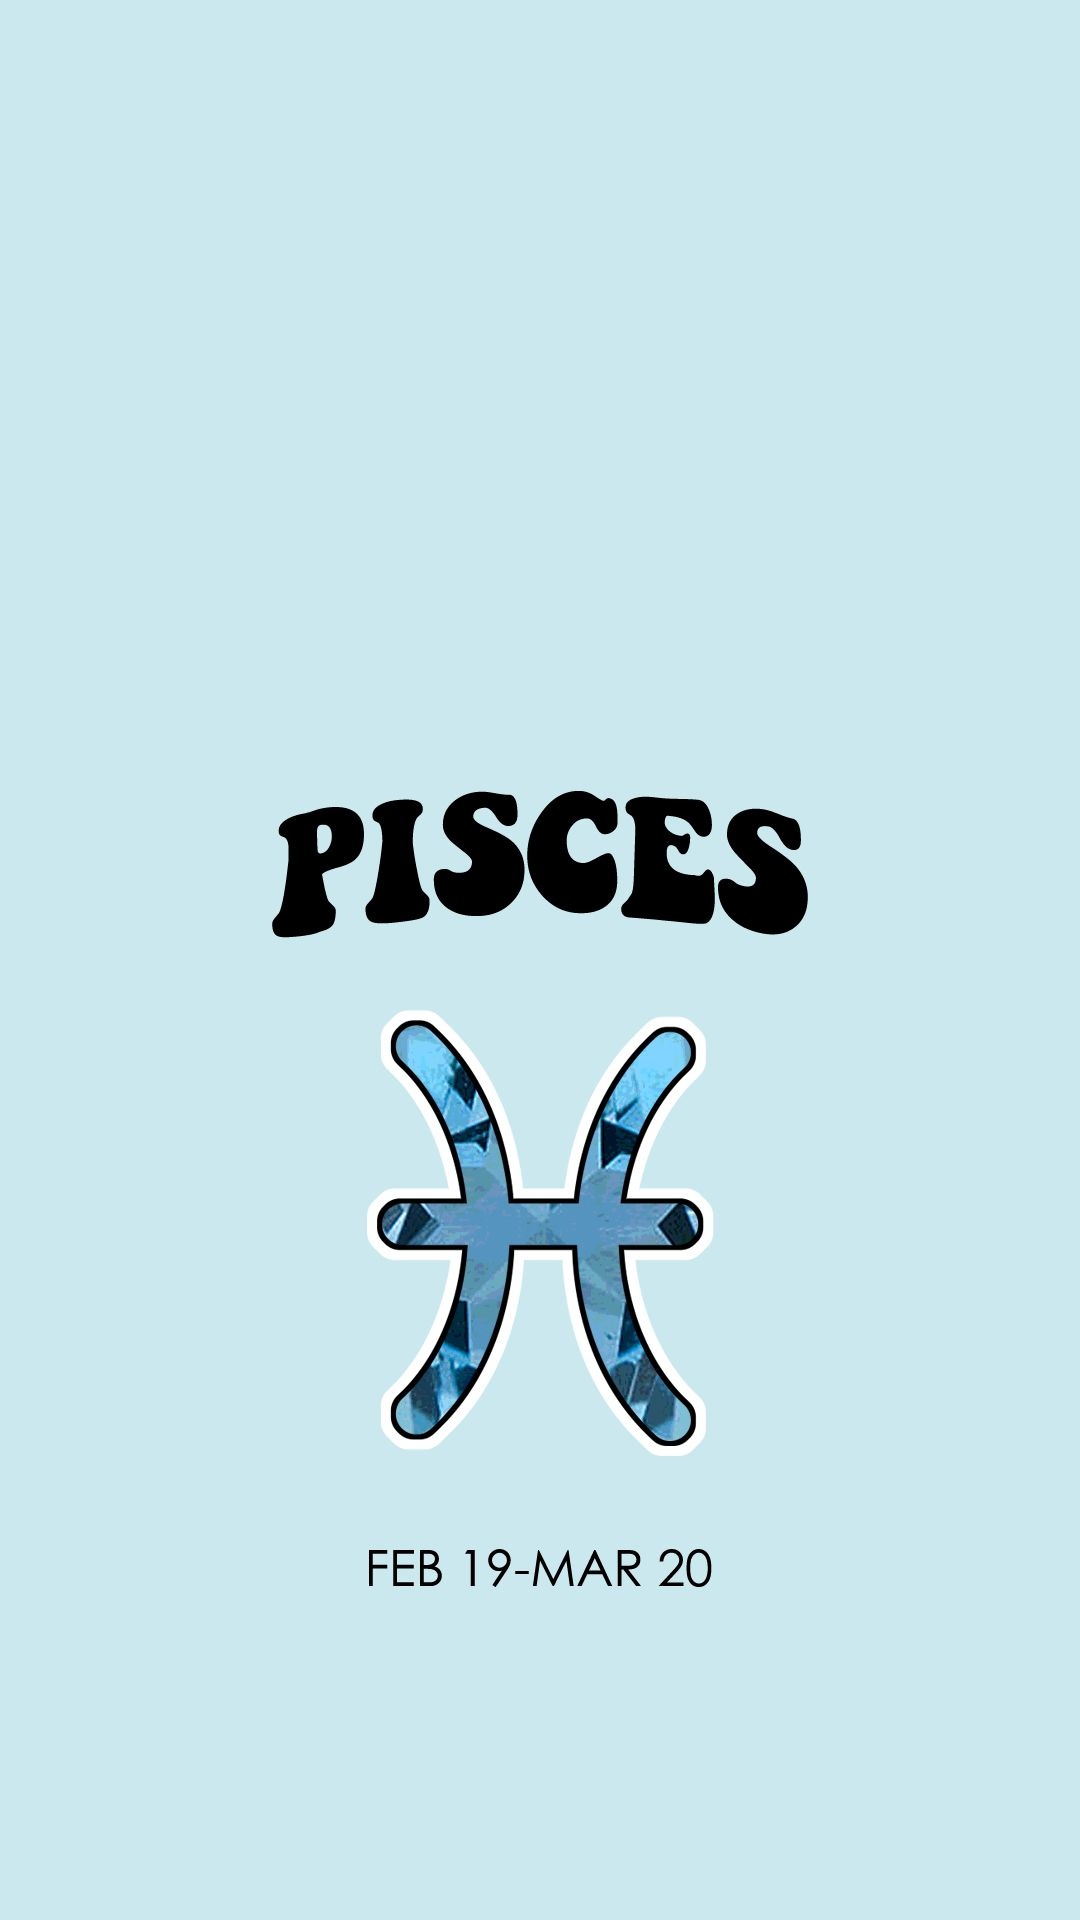 Pisces Zodiac Sign, Free wallpapers, Zodiac sign backgrounds, Personal expression, 1080x1920 Full HD Handy